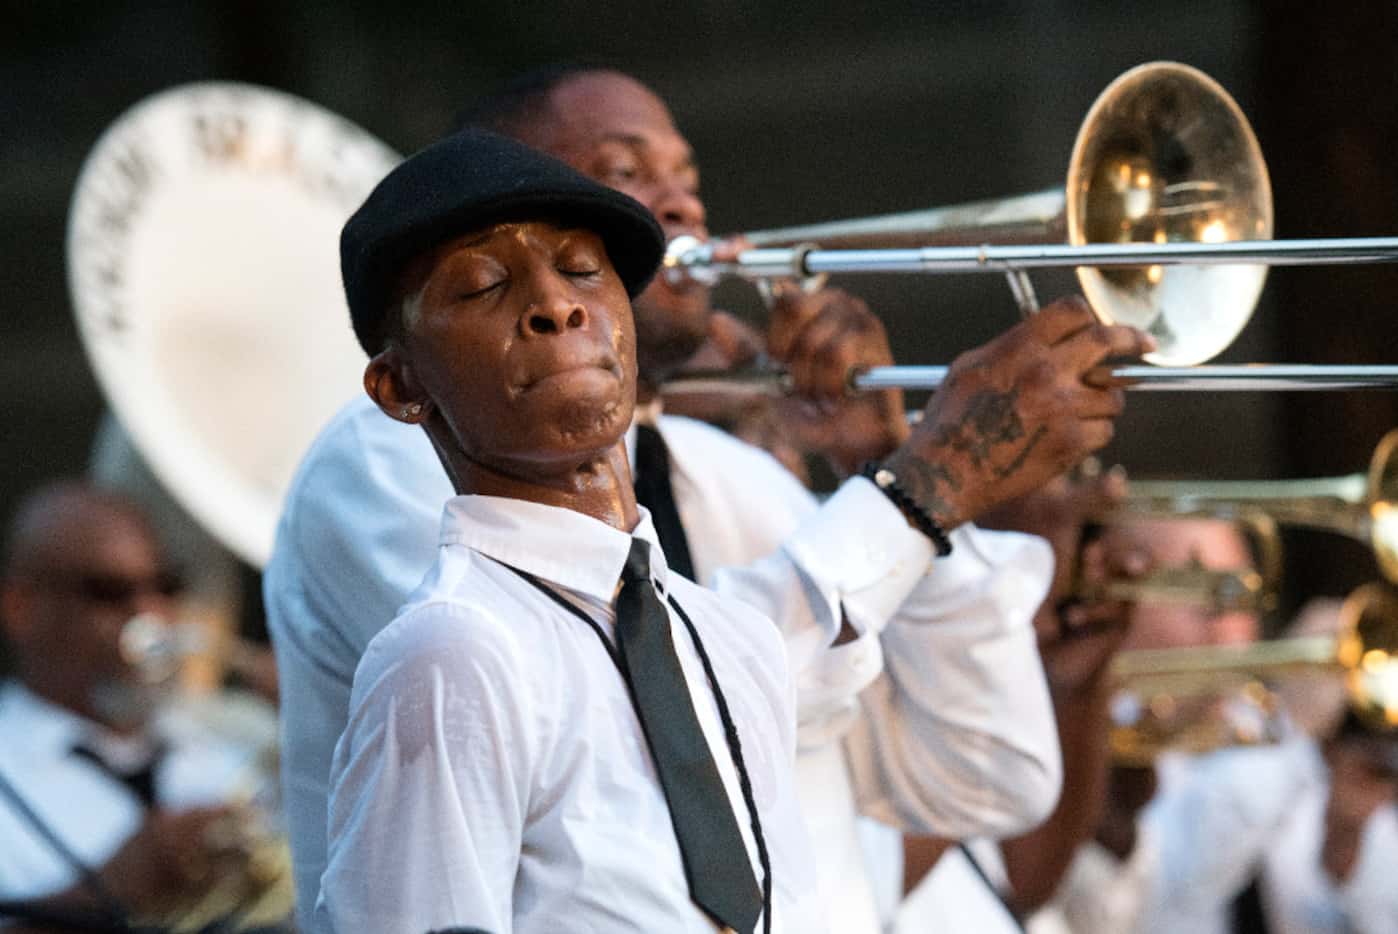 Gibson was grand marshal of the Kickin' Brass Band at the Arts District Block Party last June.